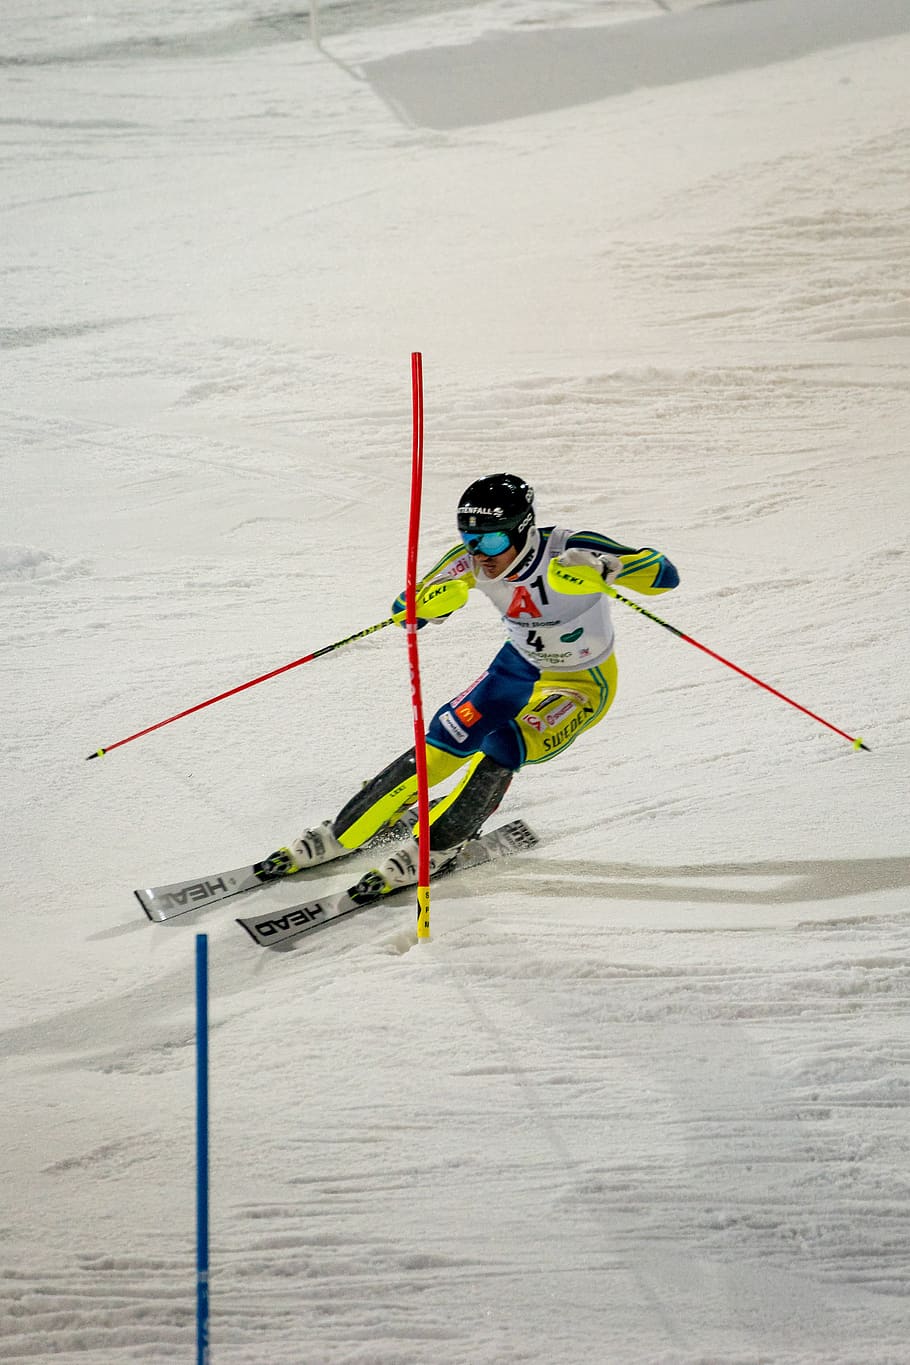 competition, hurry, race, sport, fast, slalom, night race, skiing, HD wallpaper